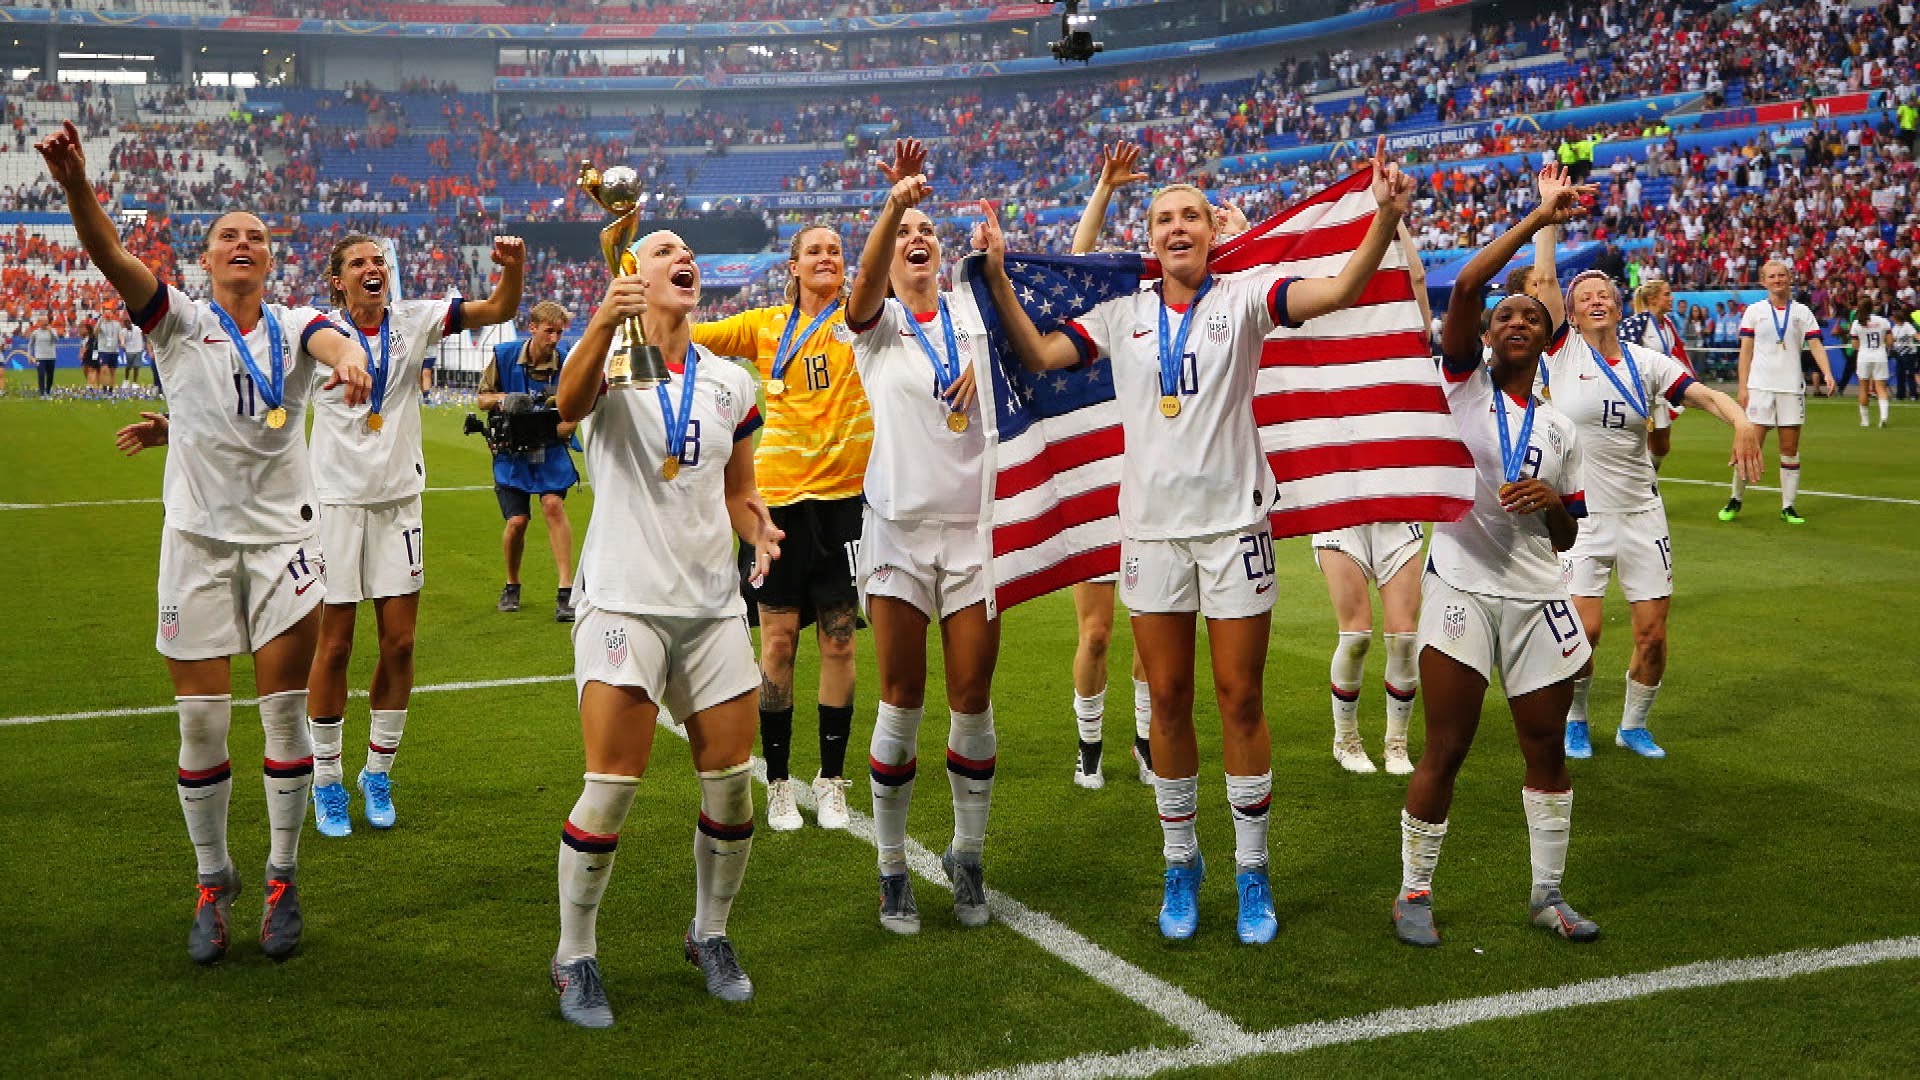 Amazing Disrespect Video Shows Us Women S Soccer Team Letting American Flag Drop To Ground